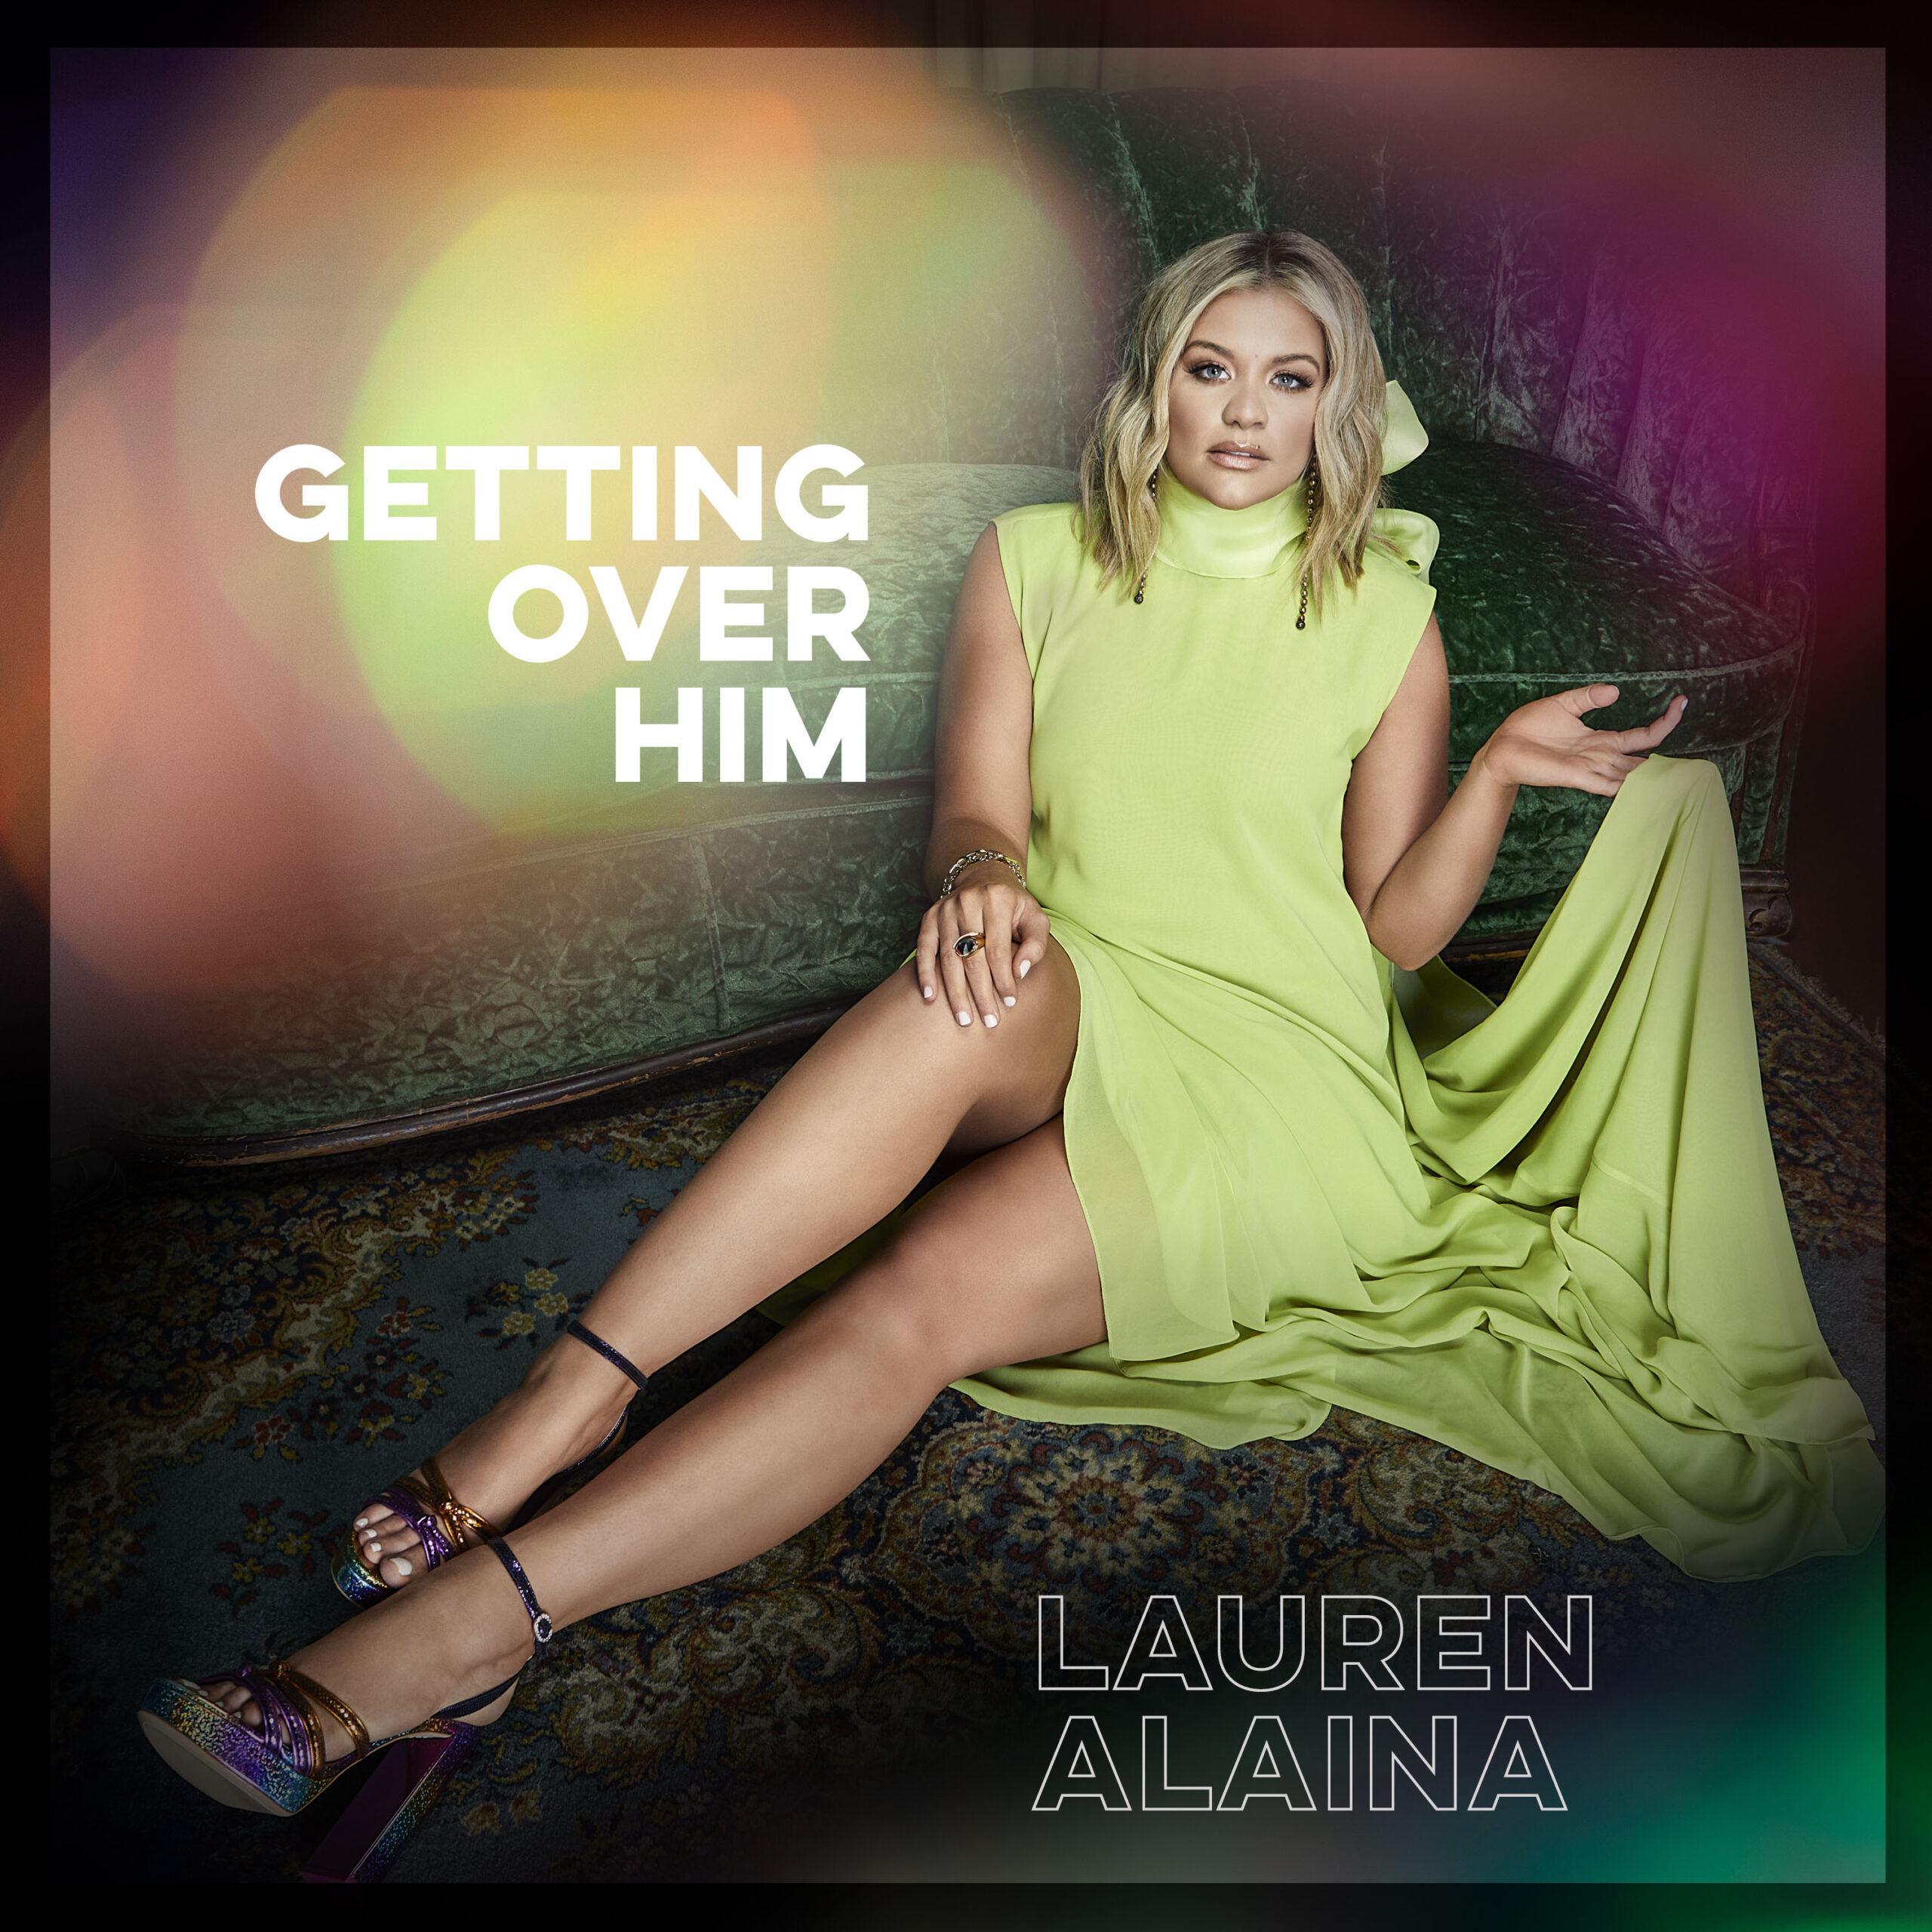 New Music Friday: Lauren Alaina Shares How She’s “Getting Over Him” in New EP & More